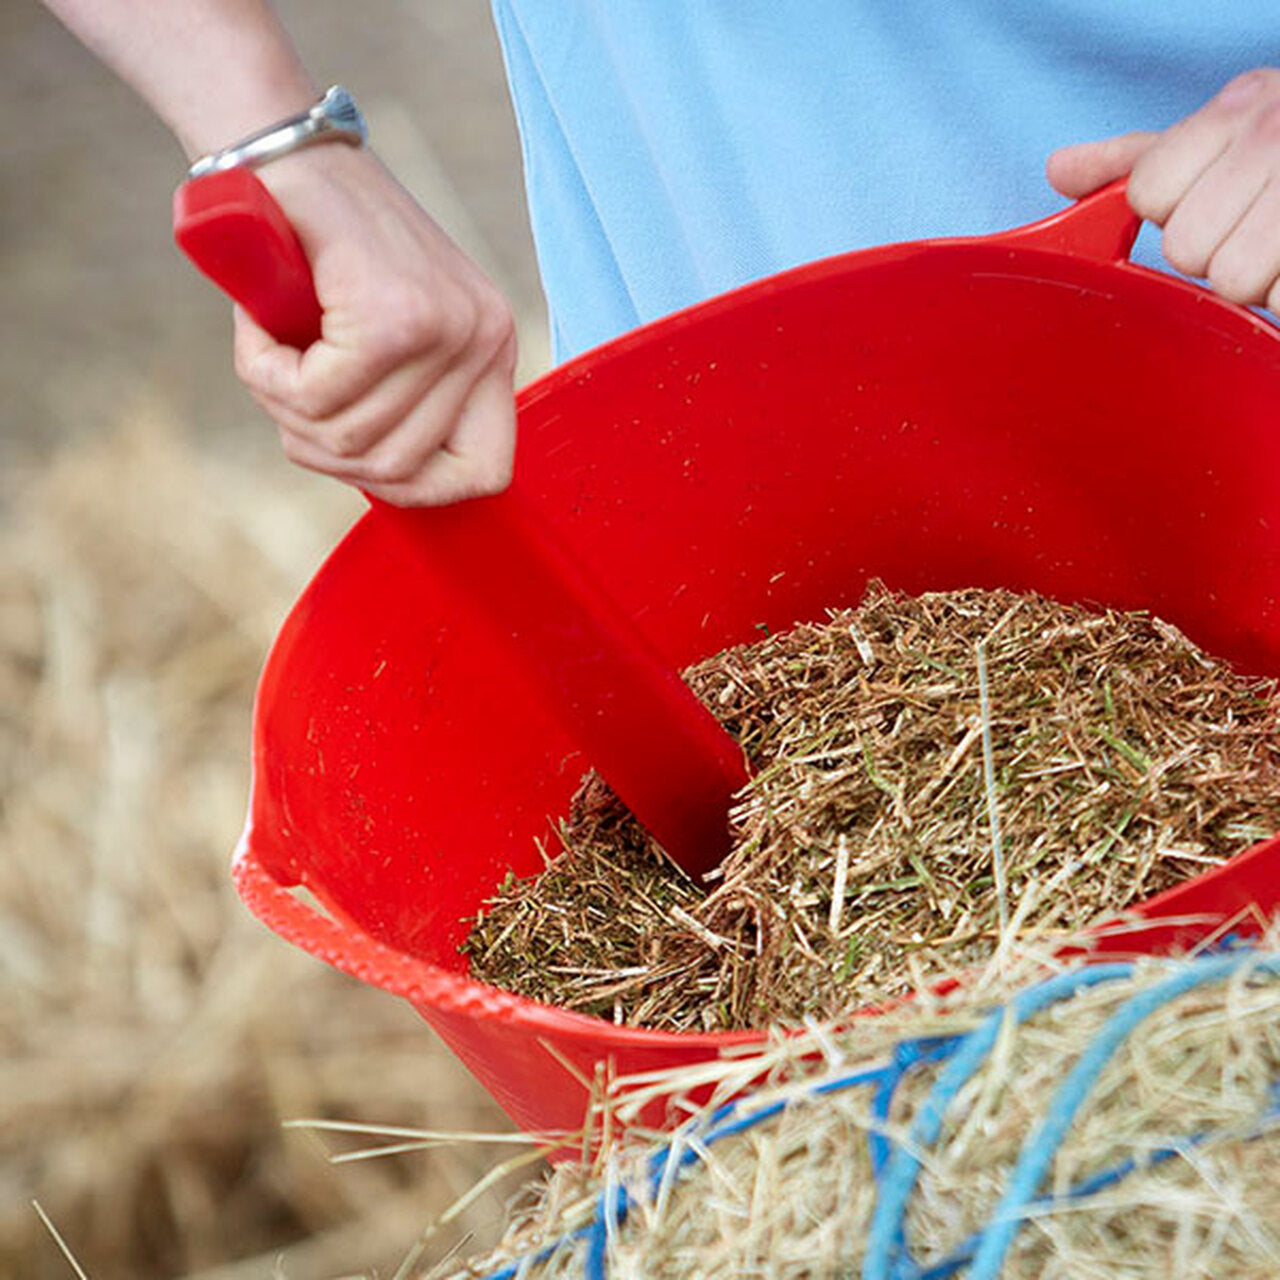 Hand using a red feed stirrer to stir chaff in a bucket.